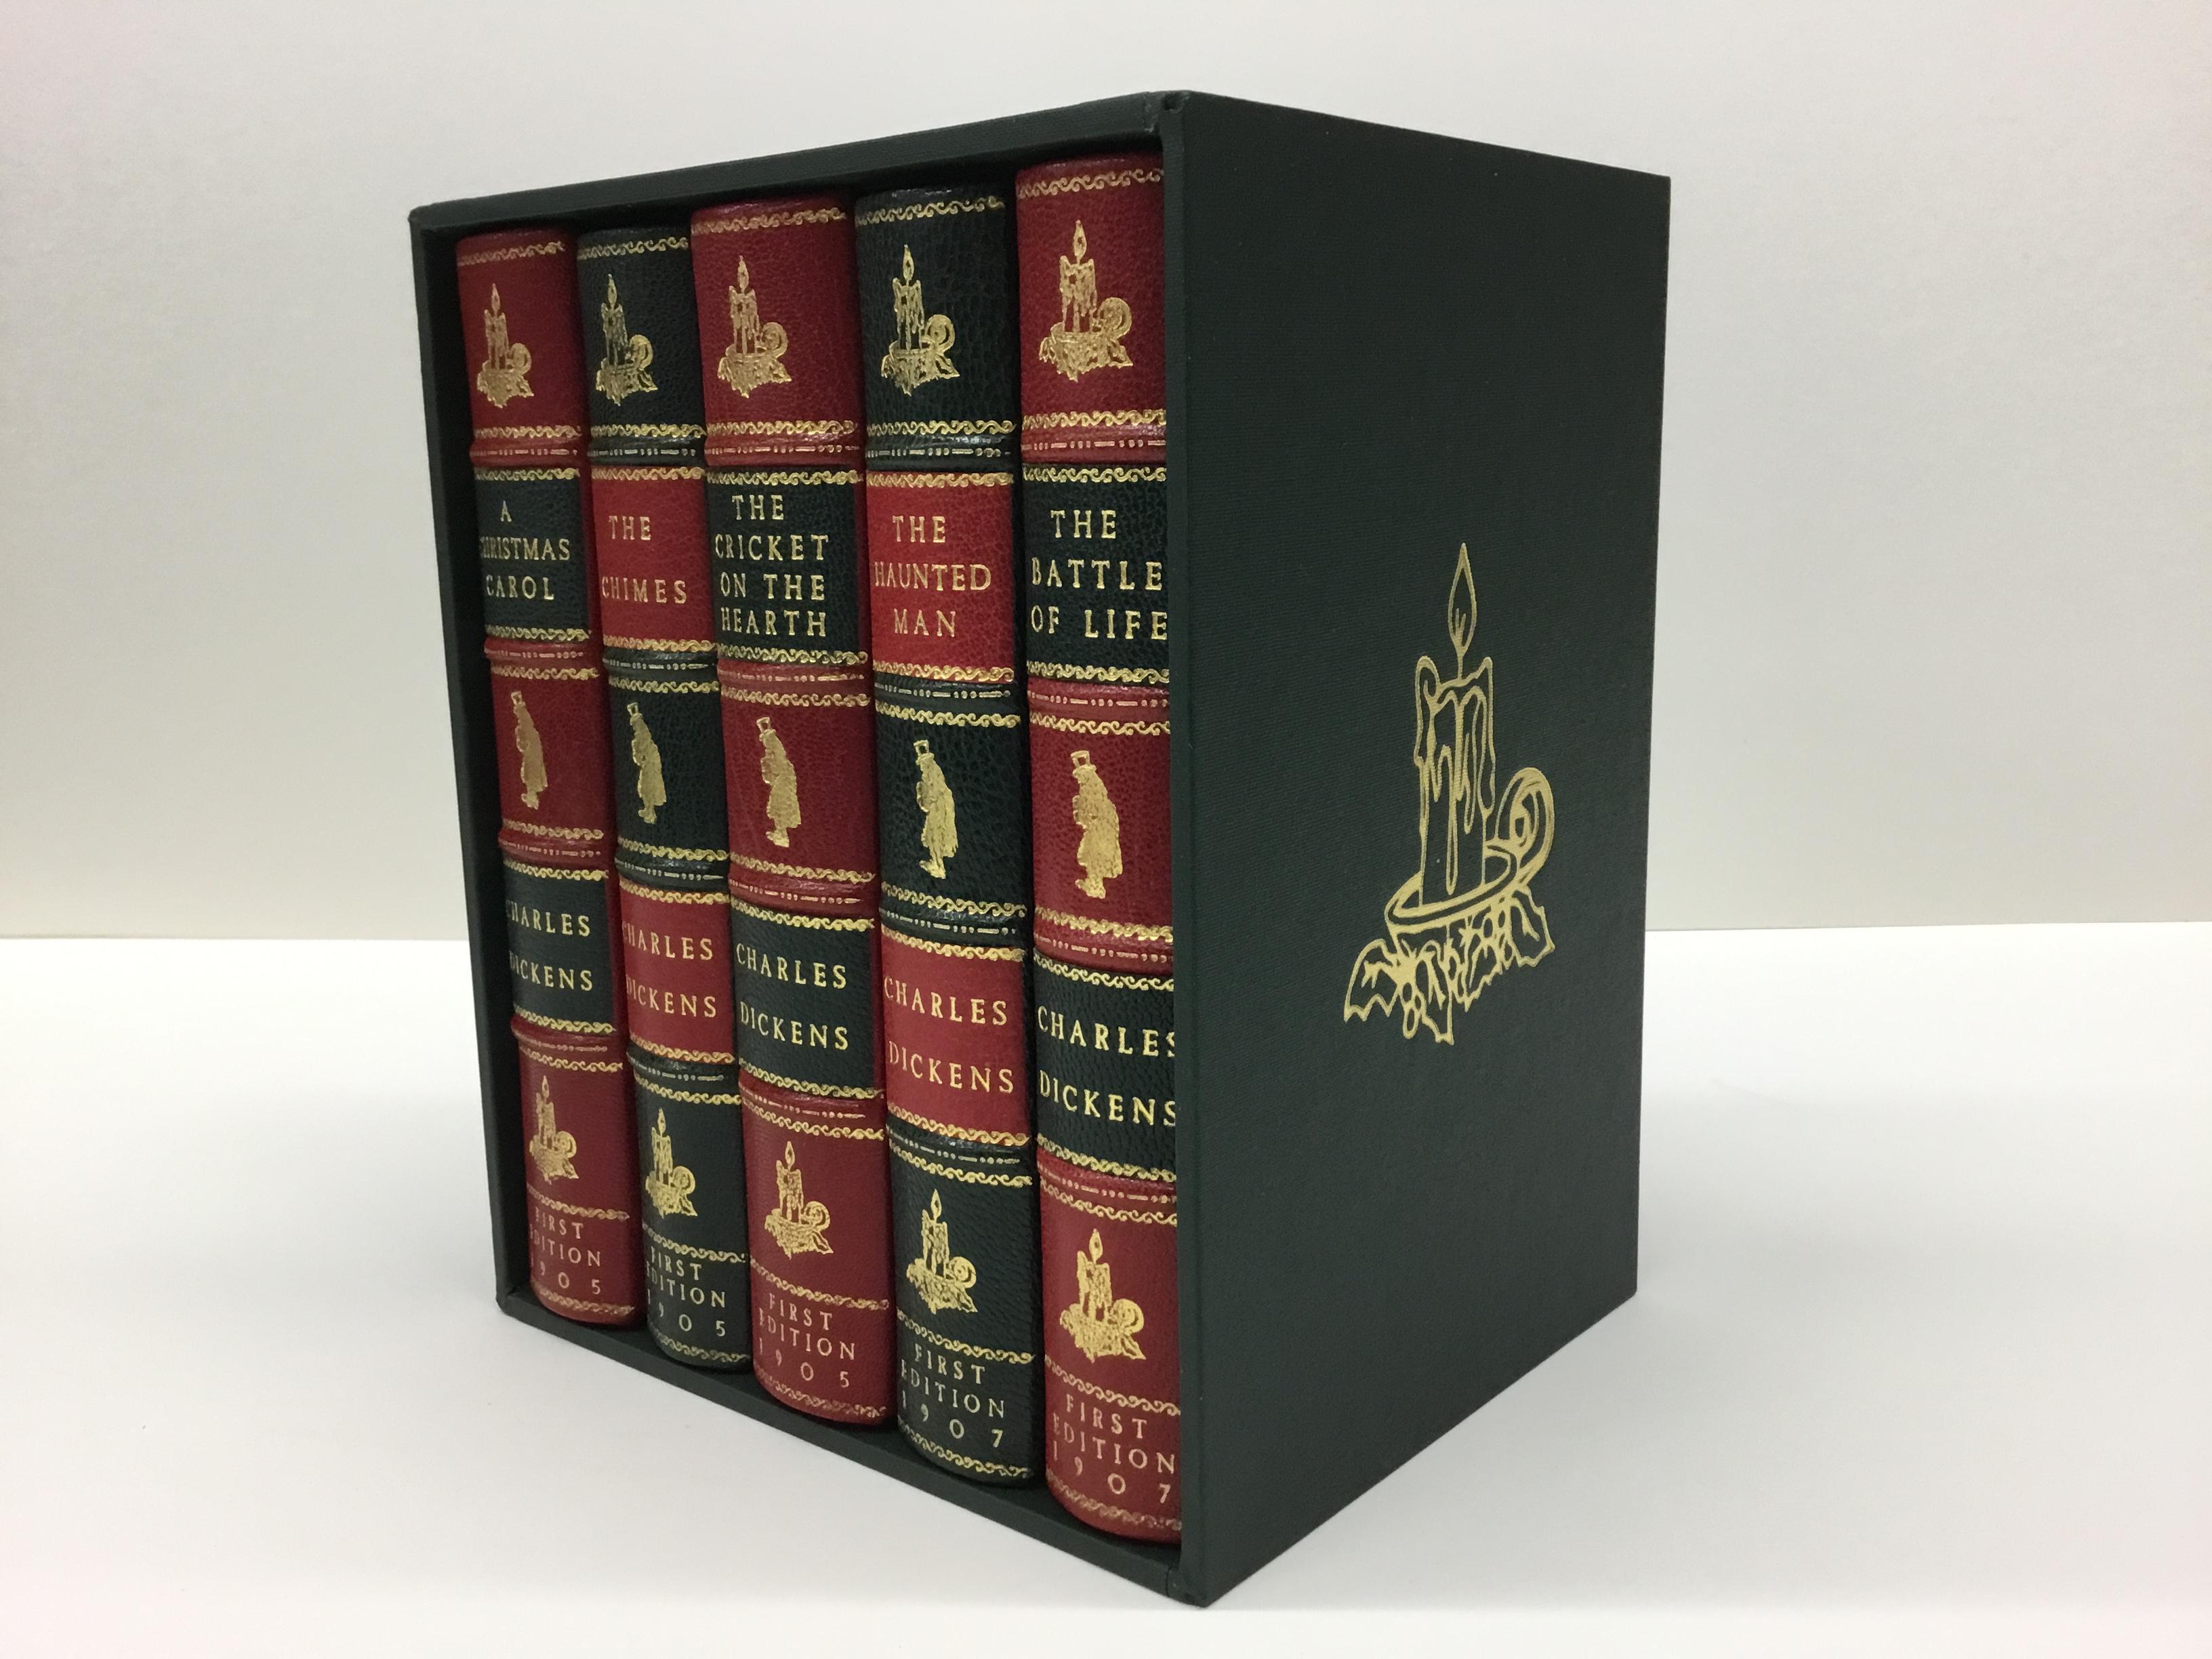 This amazing five-volume set of Christmas books by Charles Dickens includes A Christmas Carol 1905, The Chimes 1905, The Cricket on the Hearth 1905, The Haunted Man 1907, and The Battle of Life 1907.

The books were published by J.M. Dent, in